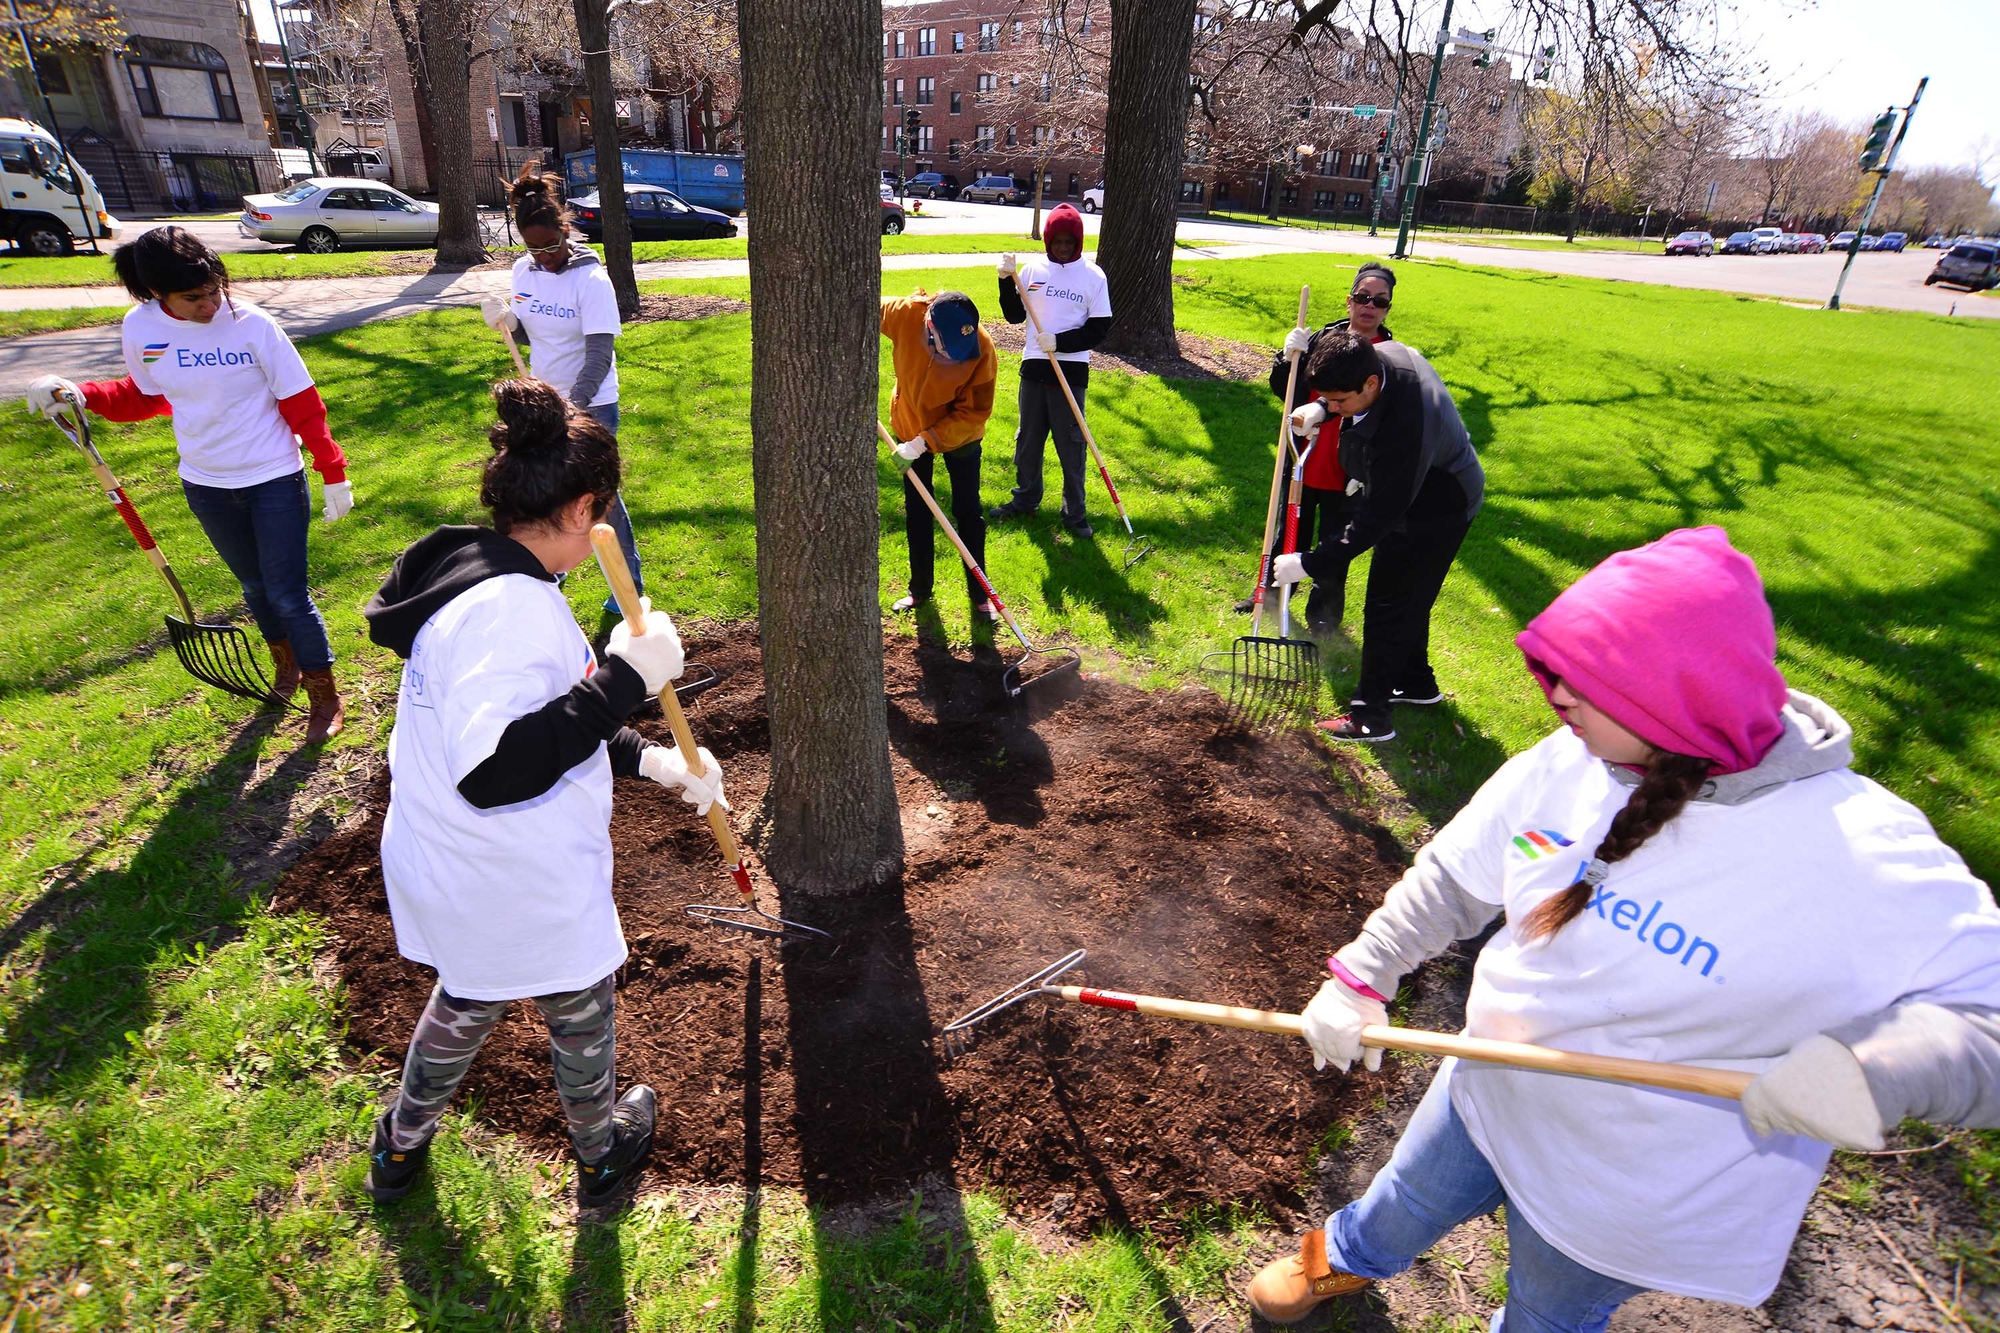 Cleaning up out. Clean Park. Park Cleaning. Volunteering Cleaning. Volunteering activities.